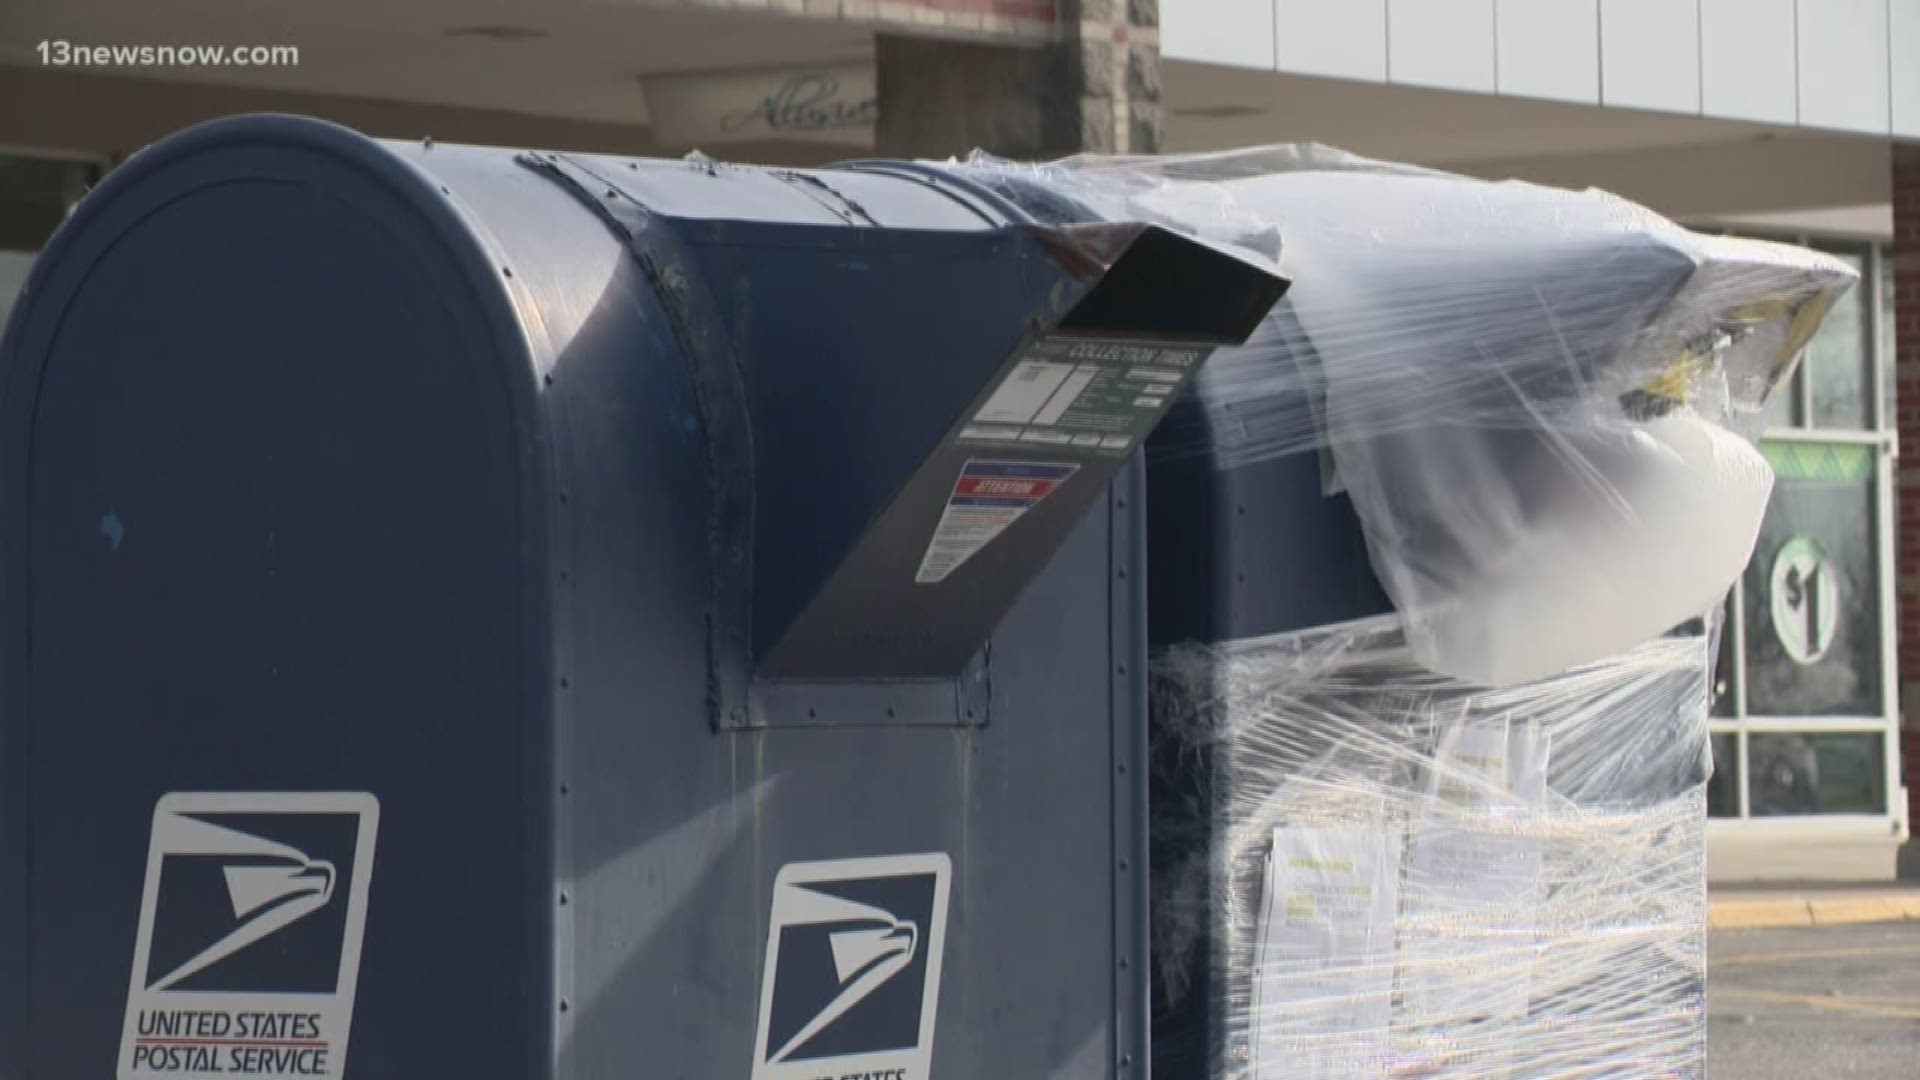 Postal Service Mail Tampering Taking Place At Mailboxes In